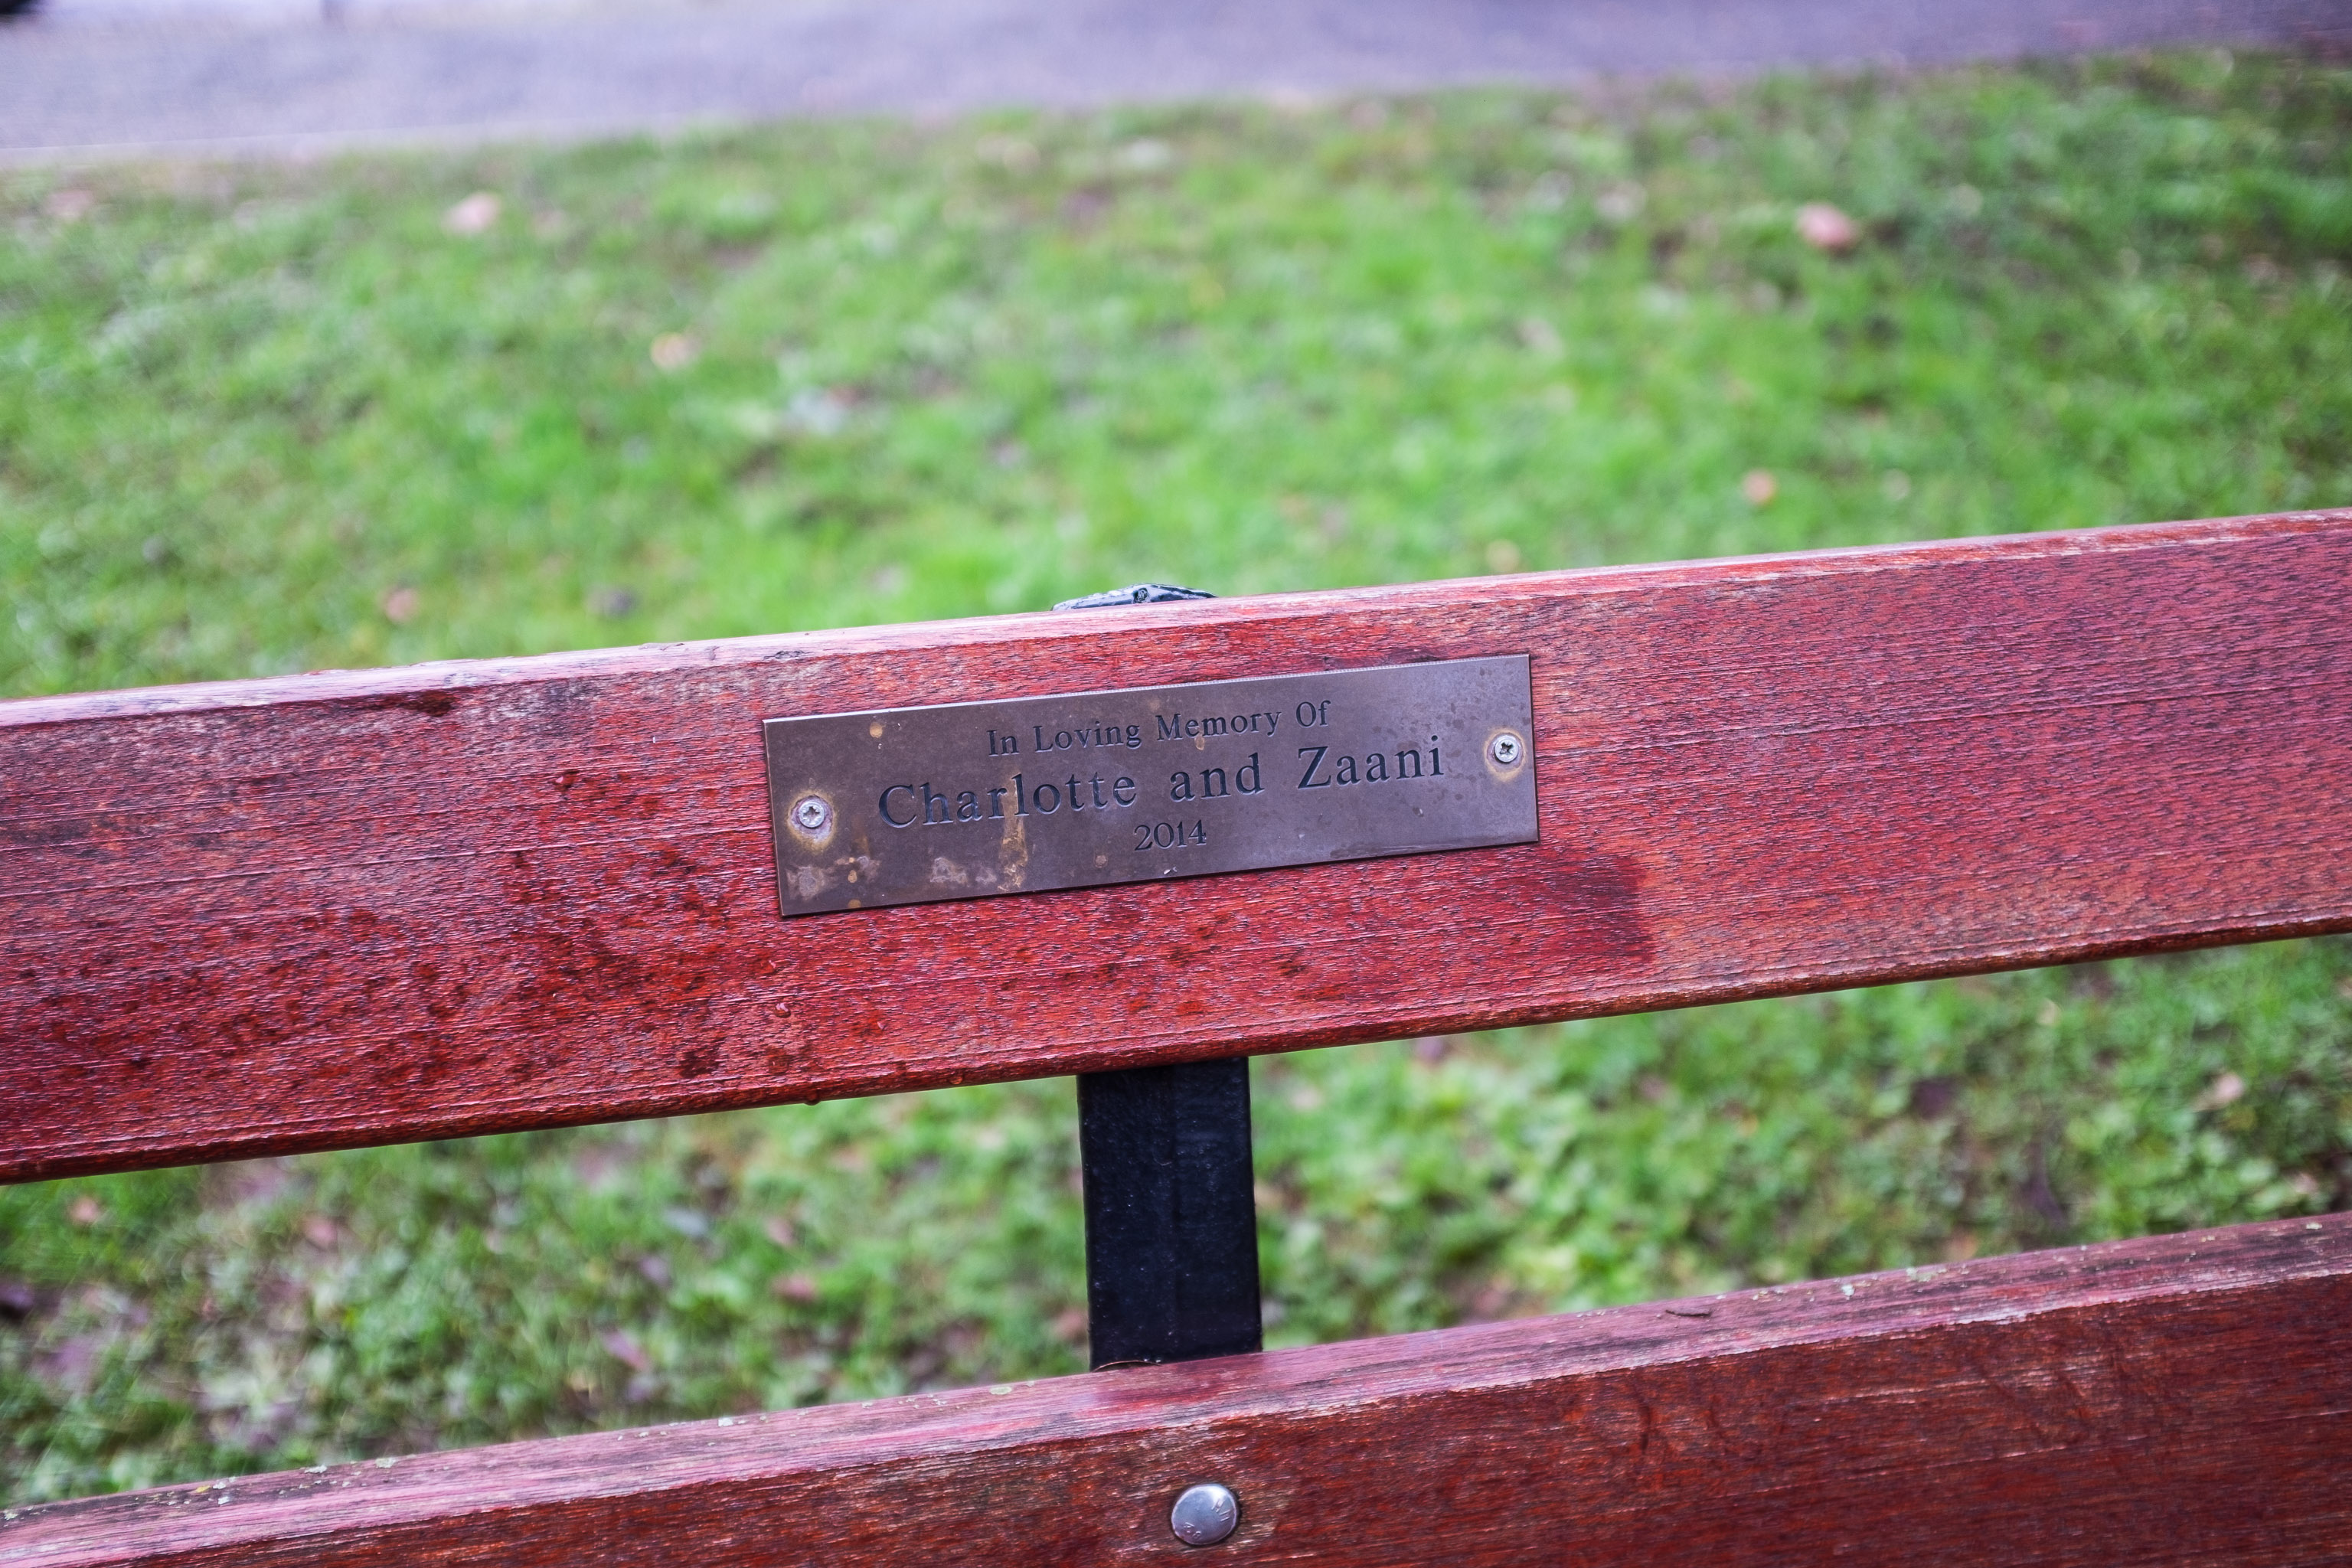 In Loving Memory
A plaque to Charlotte and Zaani Bevan. Heartbreaking.
